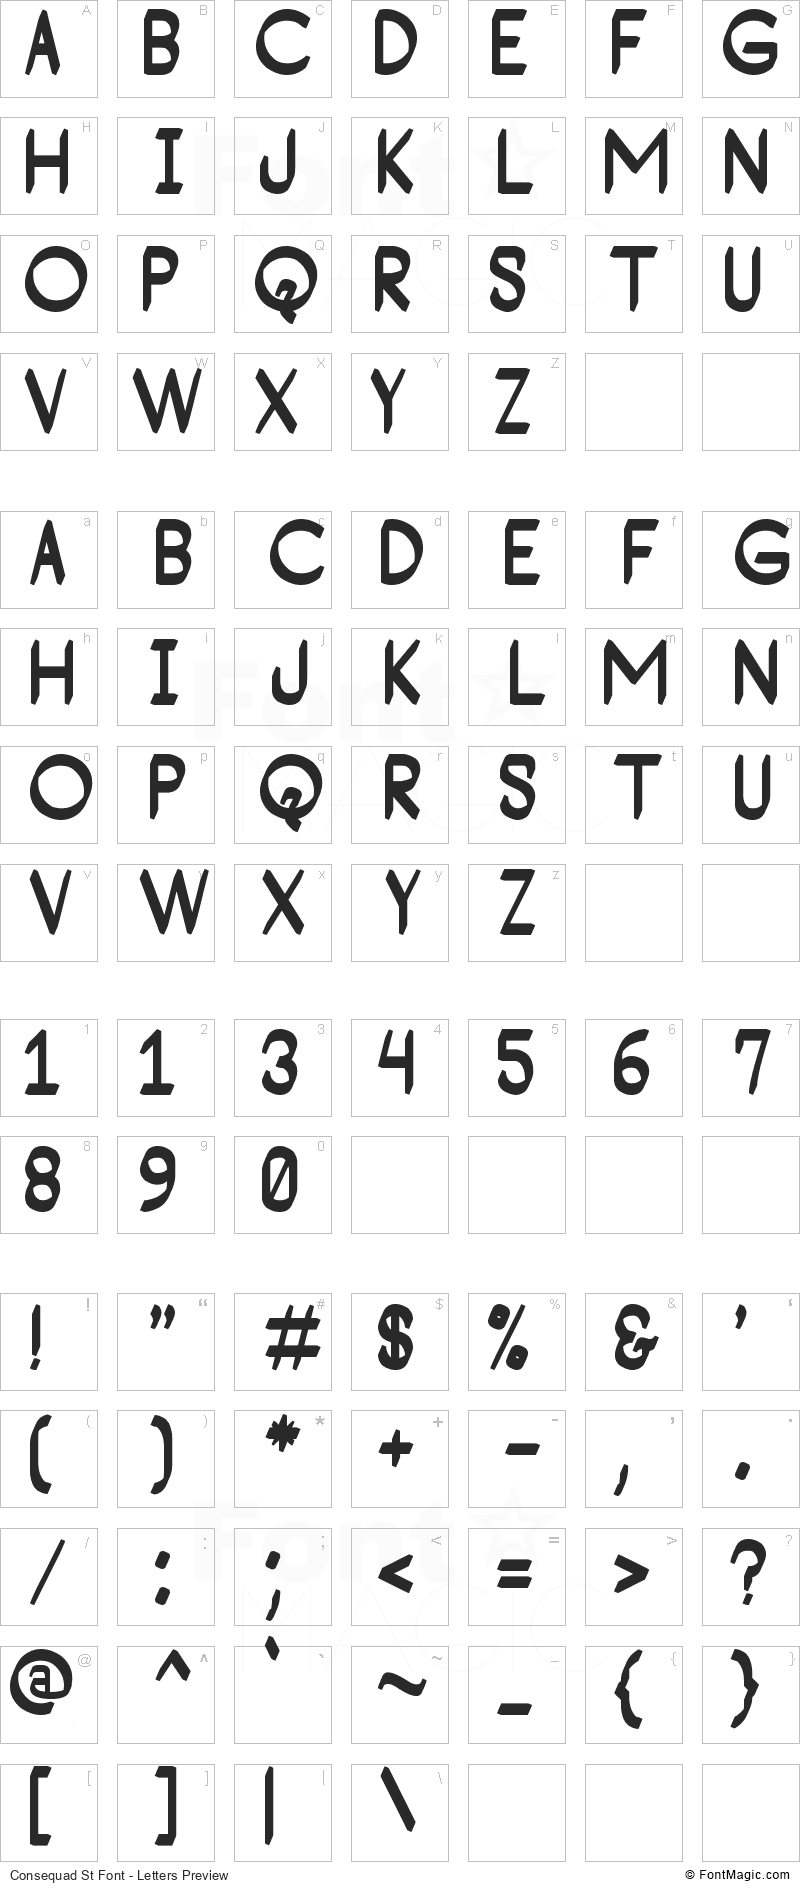 Consequad St Font - All Latters Preview Chart